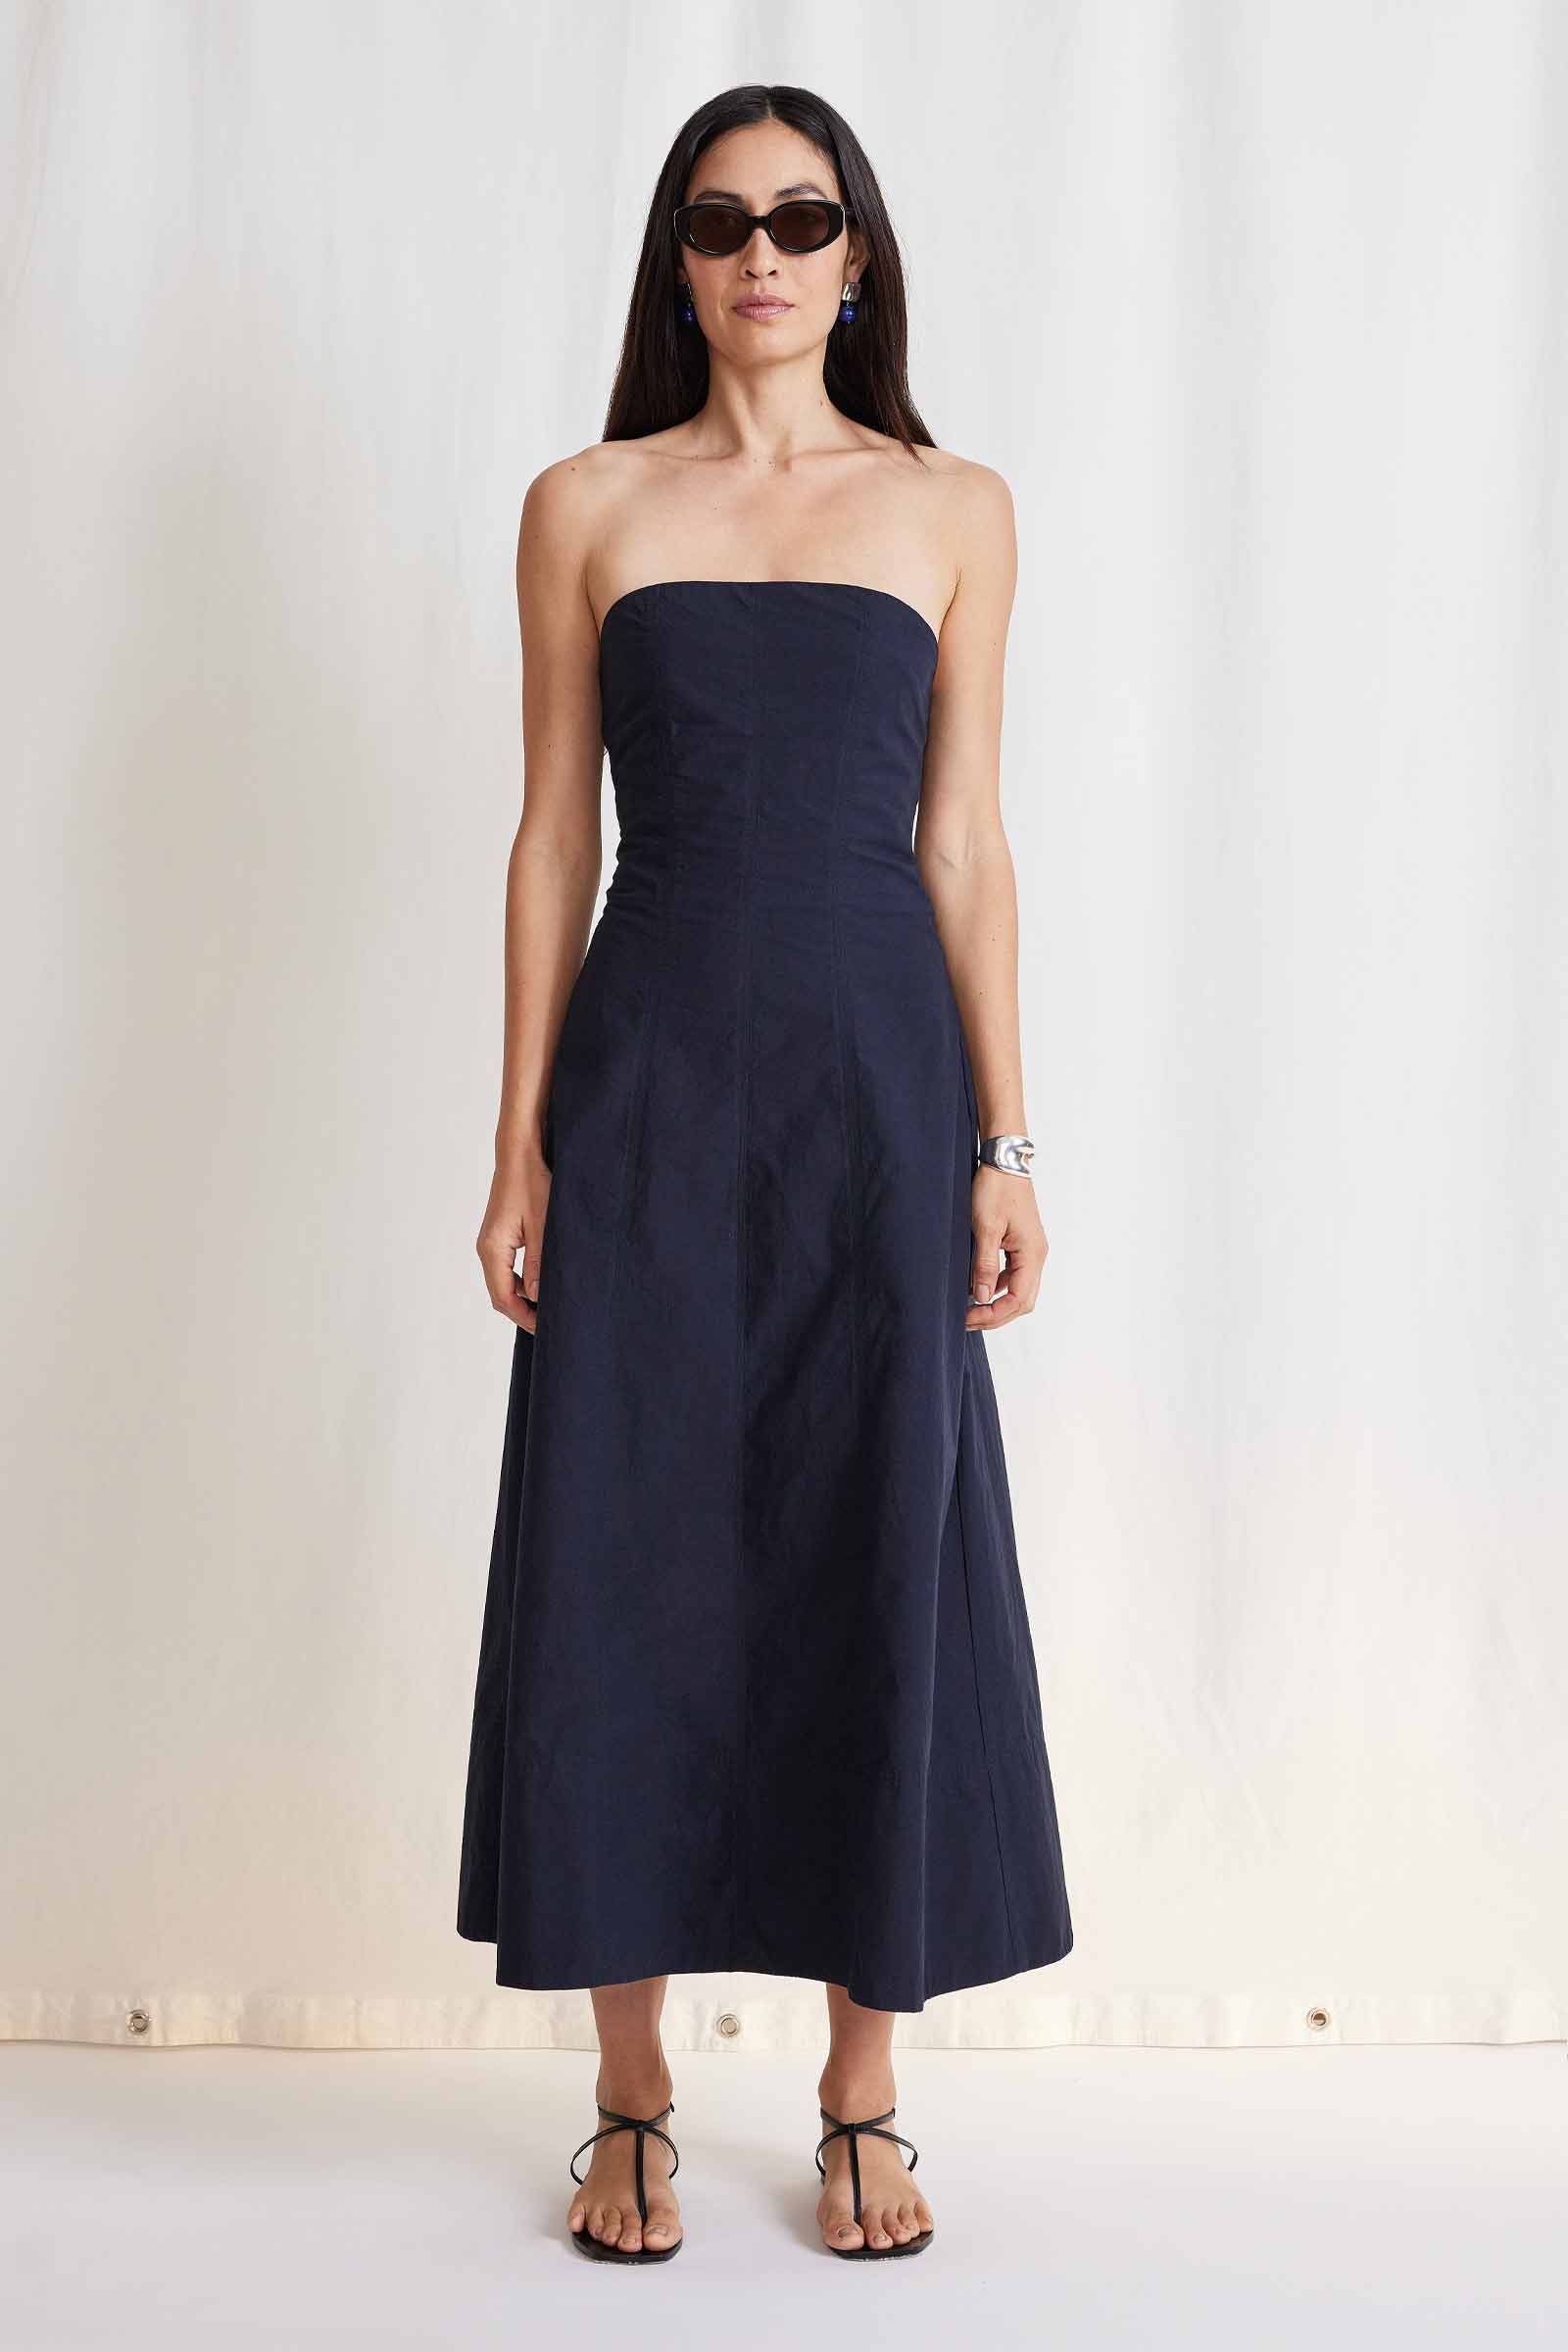 A lookbook image of a model wearing the Apiece Apart Todo Strapless Maxi Dress.